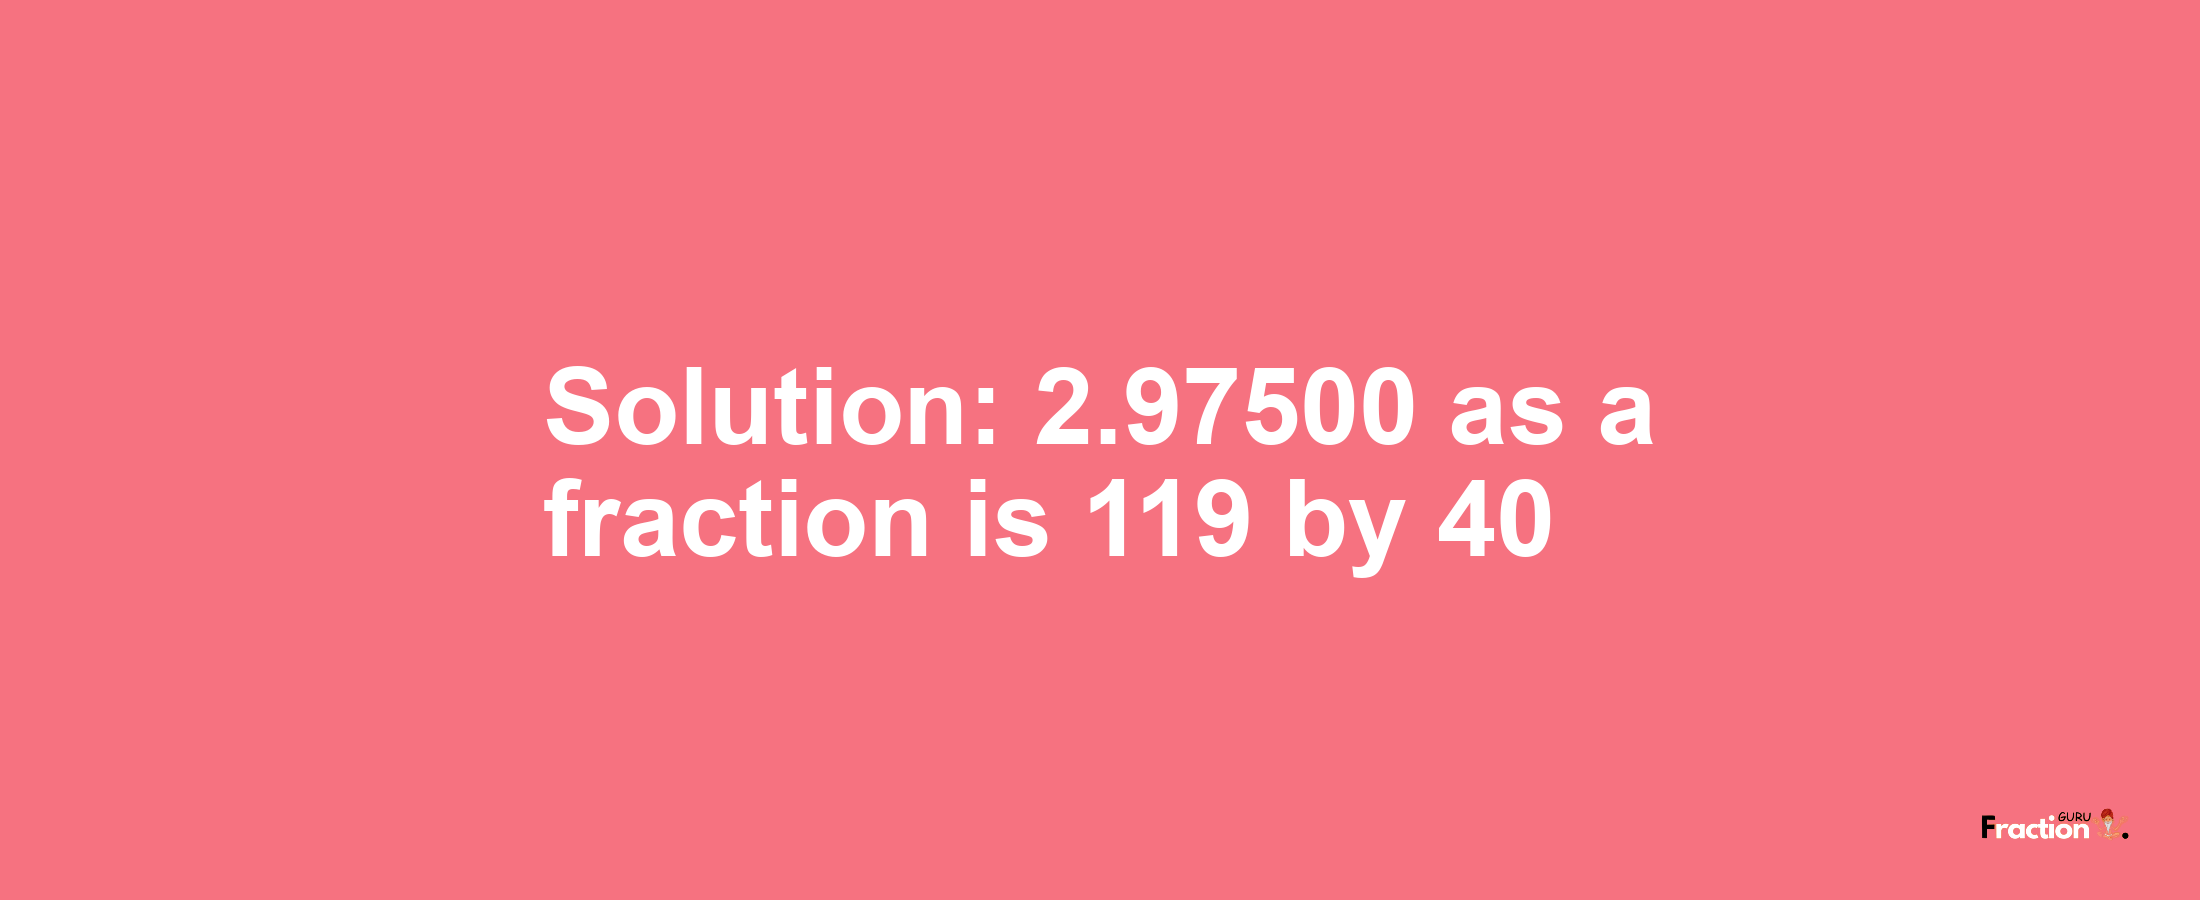 Solution:2.97500 as a fraction is 119/40